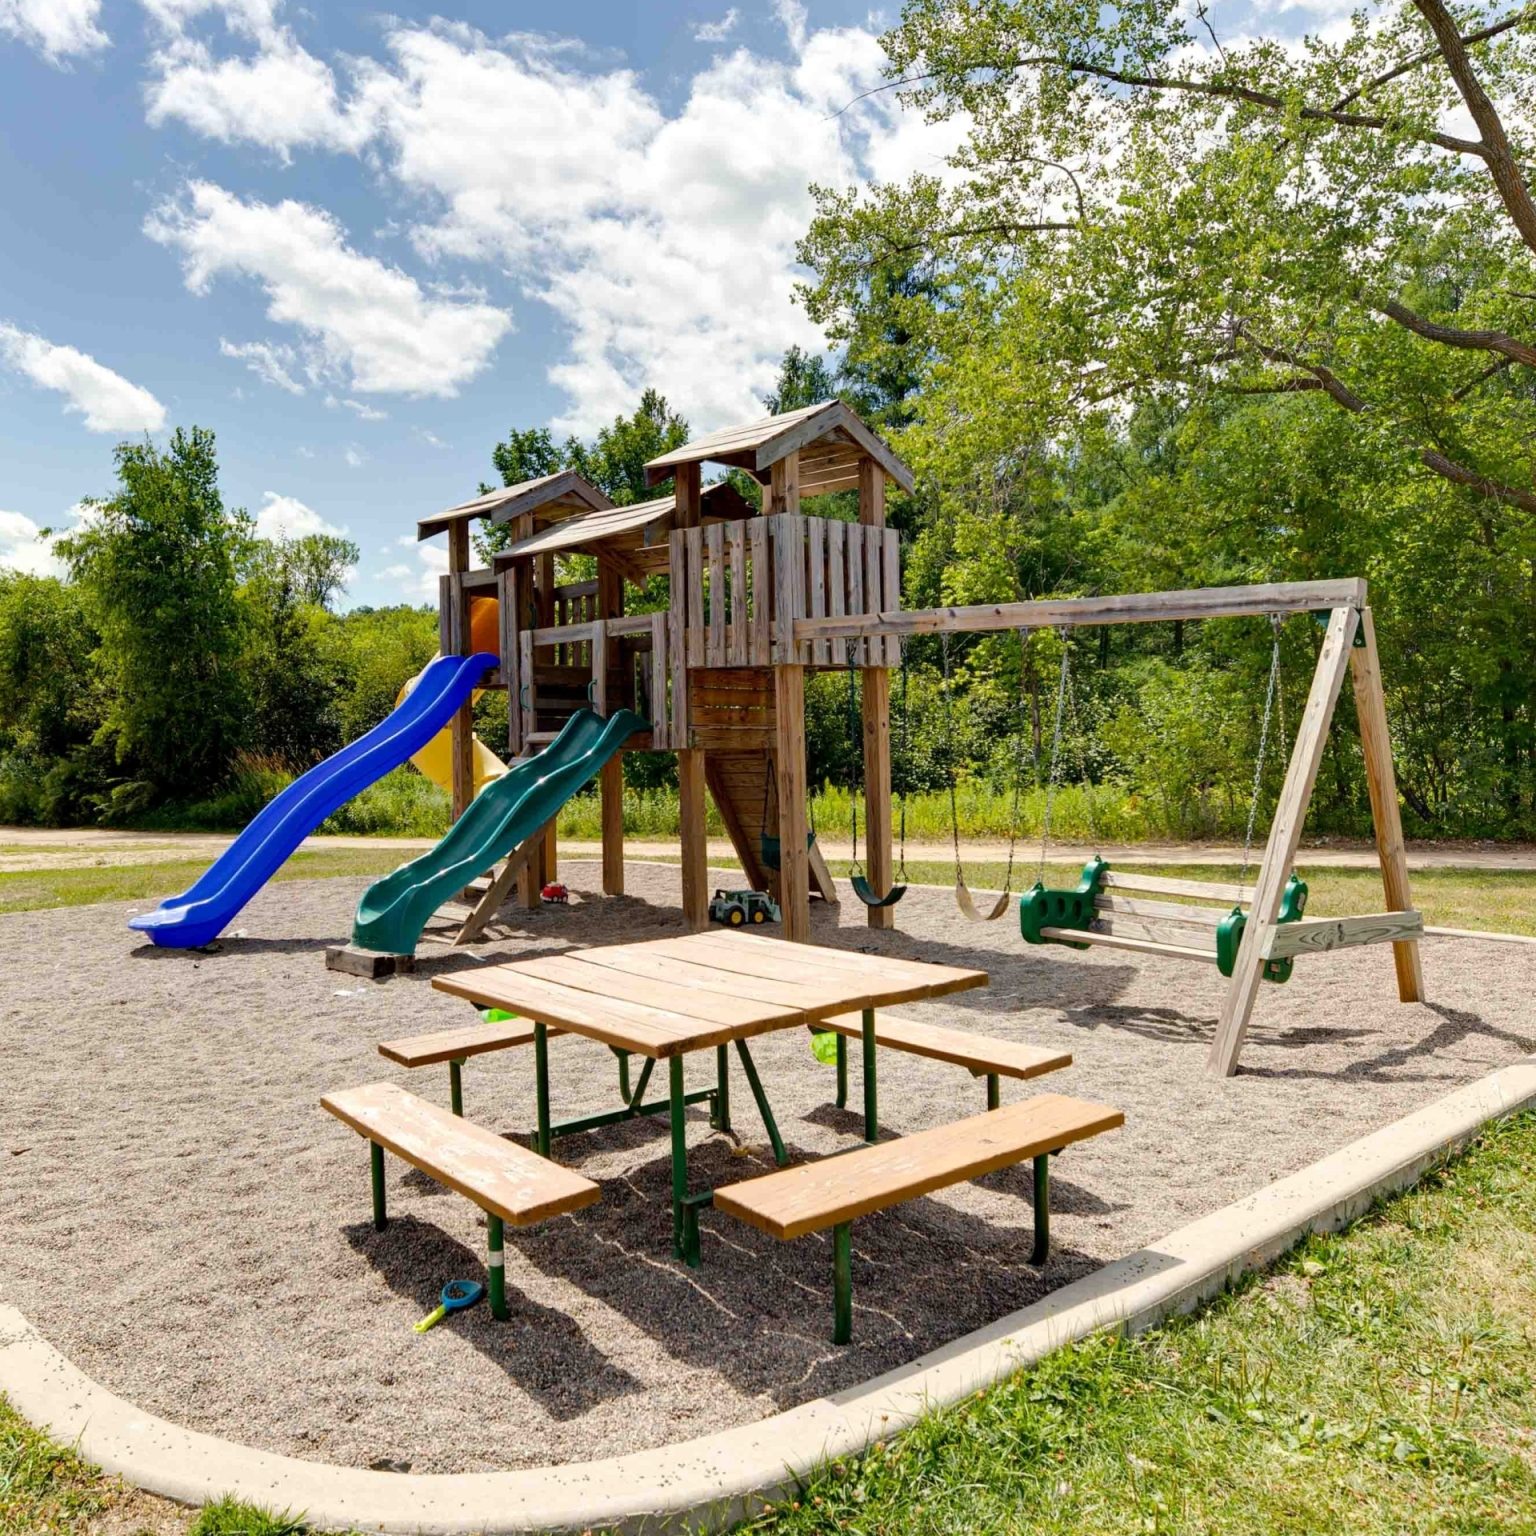 Playground with a swingset and elevated playhouse with 2 slides on a pea gravel concrete rimmed pad on a sunny day